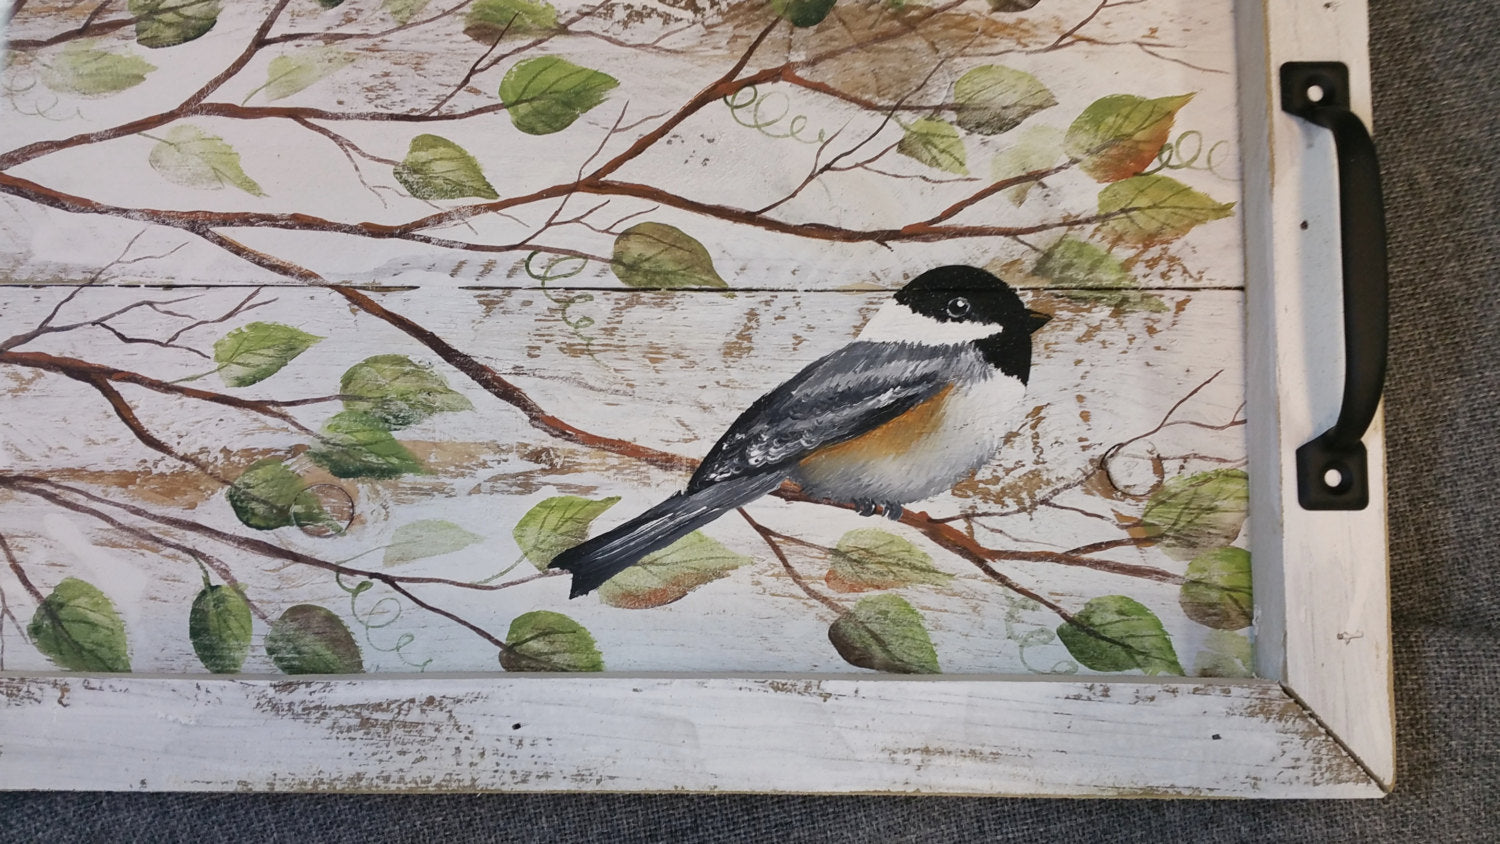 Decorative hand painted pallet tray, Farmhouse decor painted leaves and chickadee bird